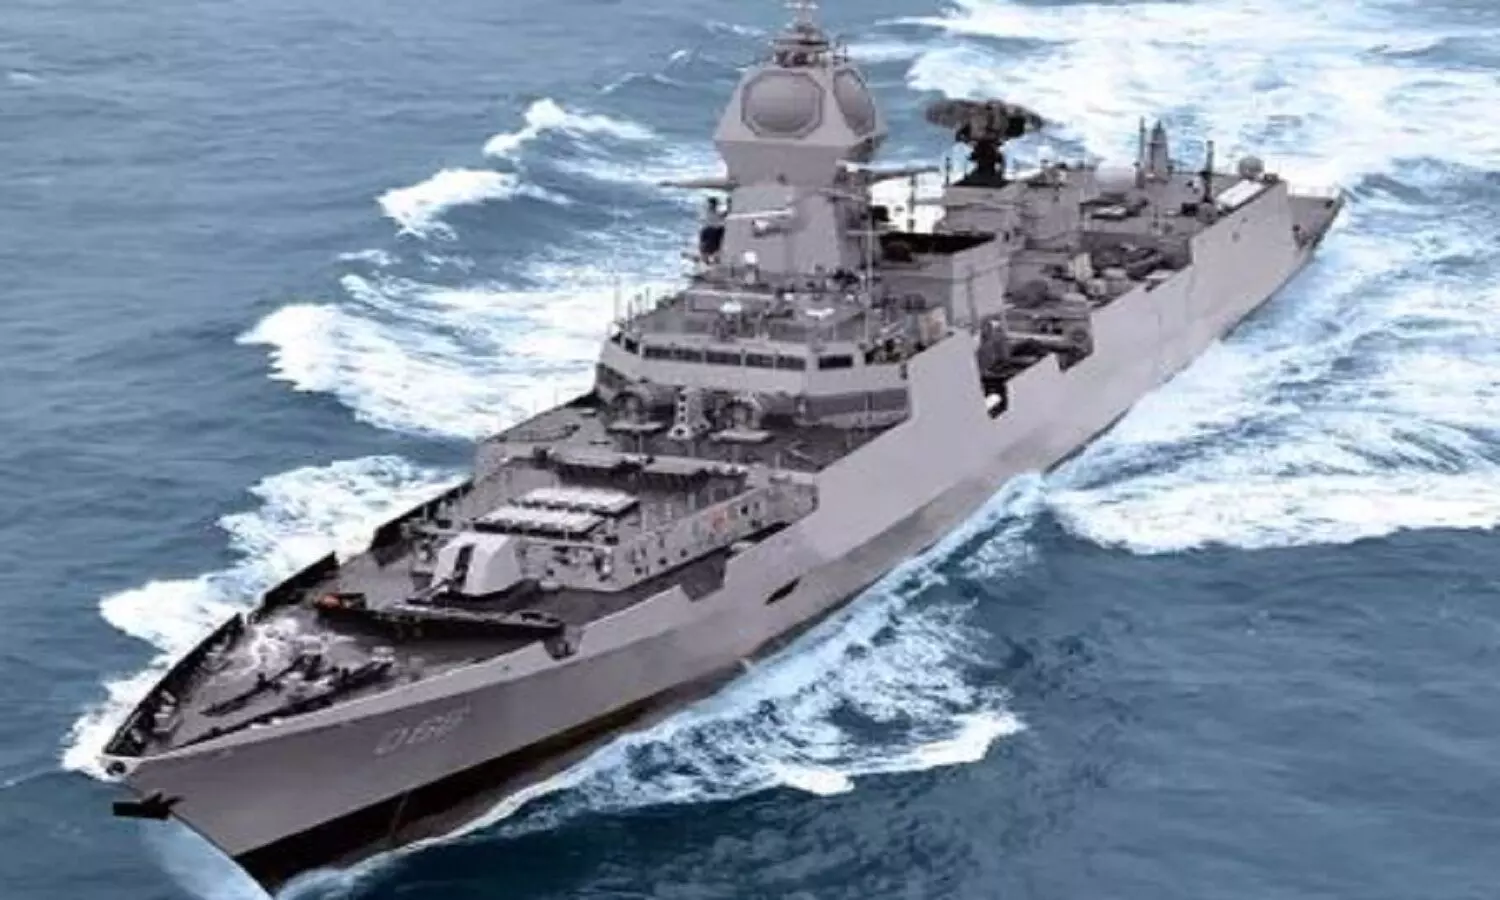 warship INS Mormugao will be included in the Indian Navy today